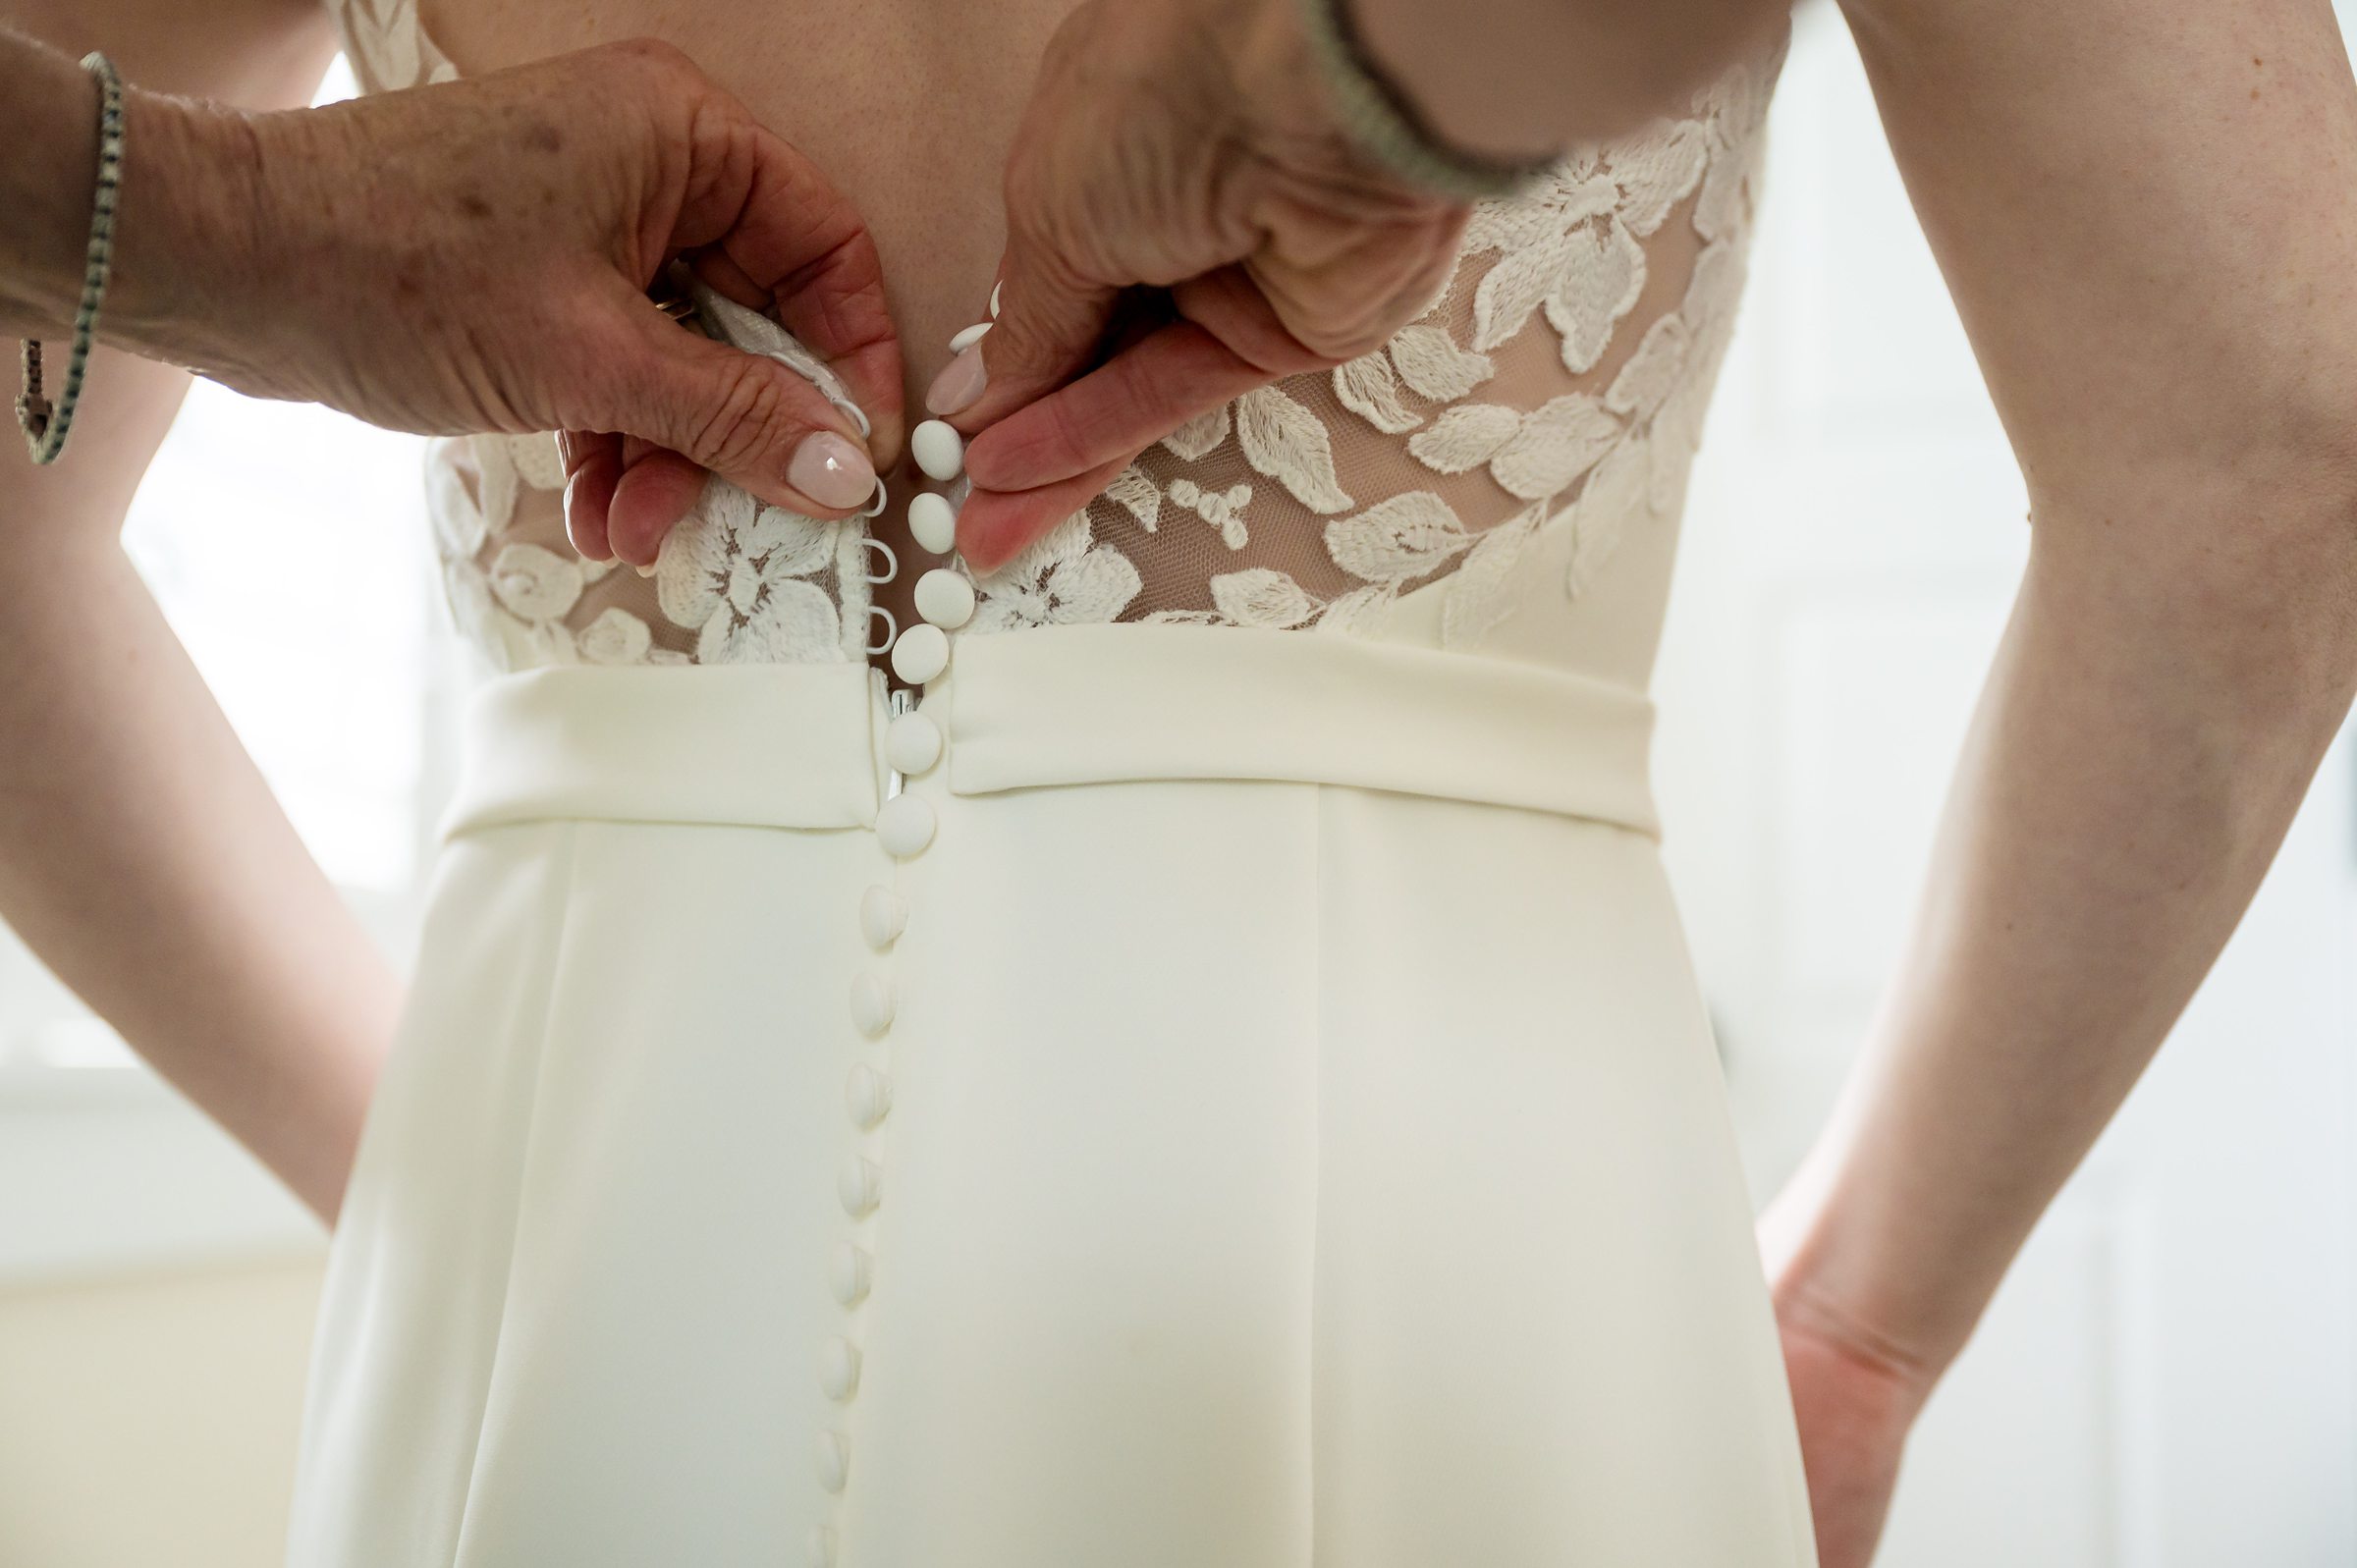 Close-up of a person buttoning the back of a white wedding dress adorned with lace.